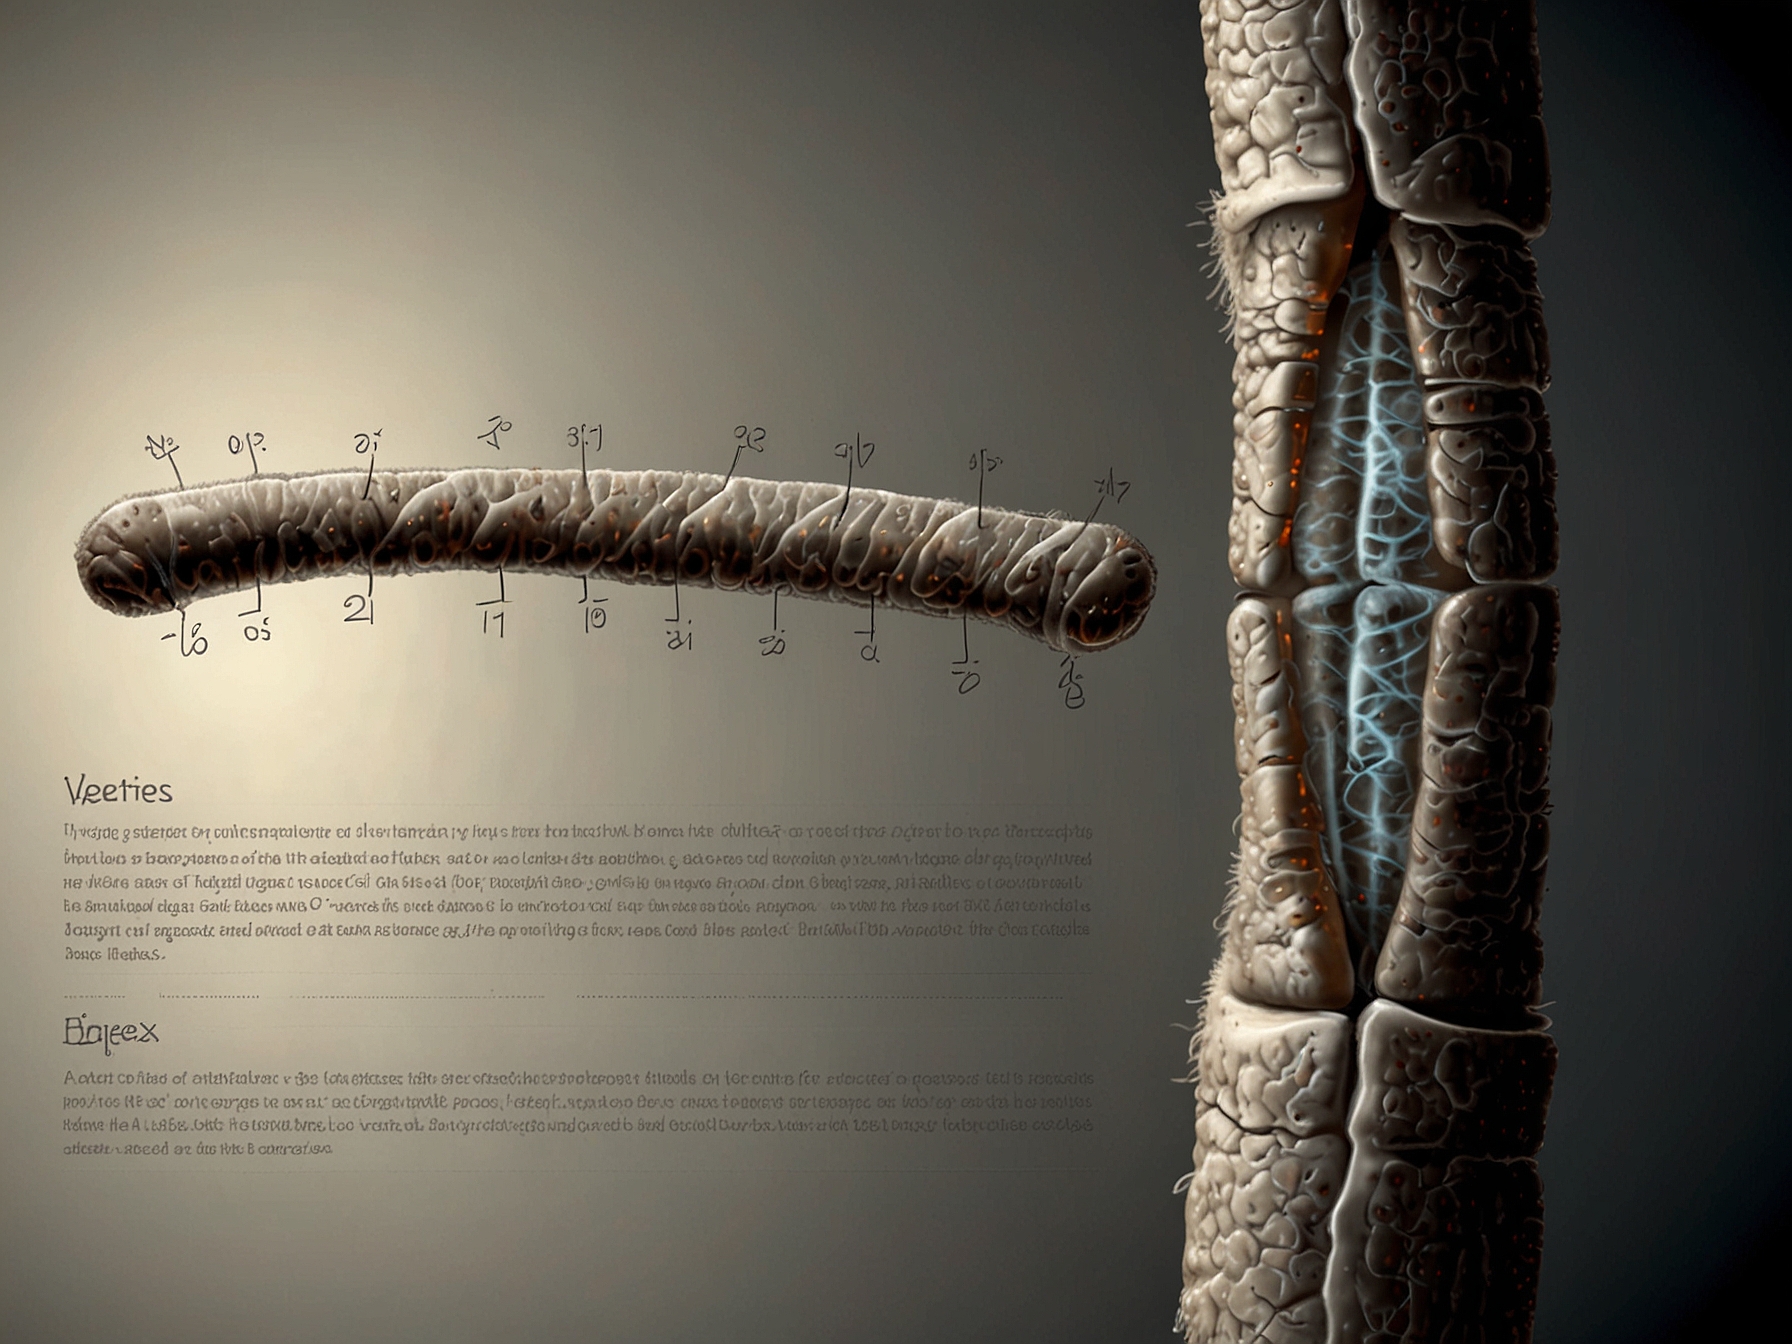 A detailed illustration of the human Y chromosome, highlighting the absence of Neanderthal DNA, with annotations explaining the genetic differences and selective pressures involved.